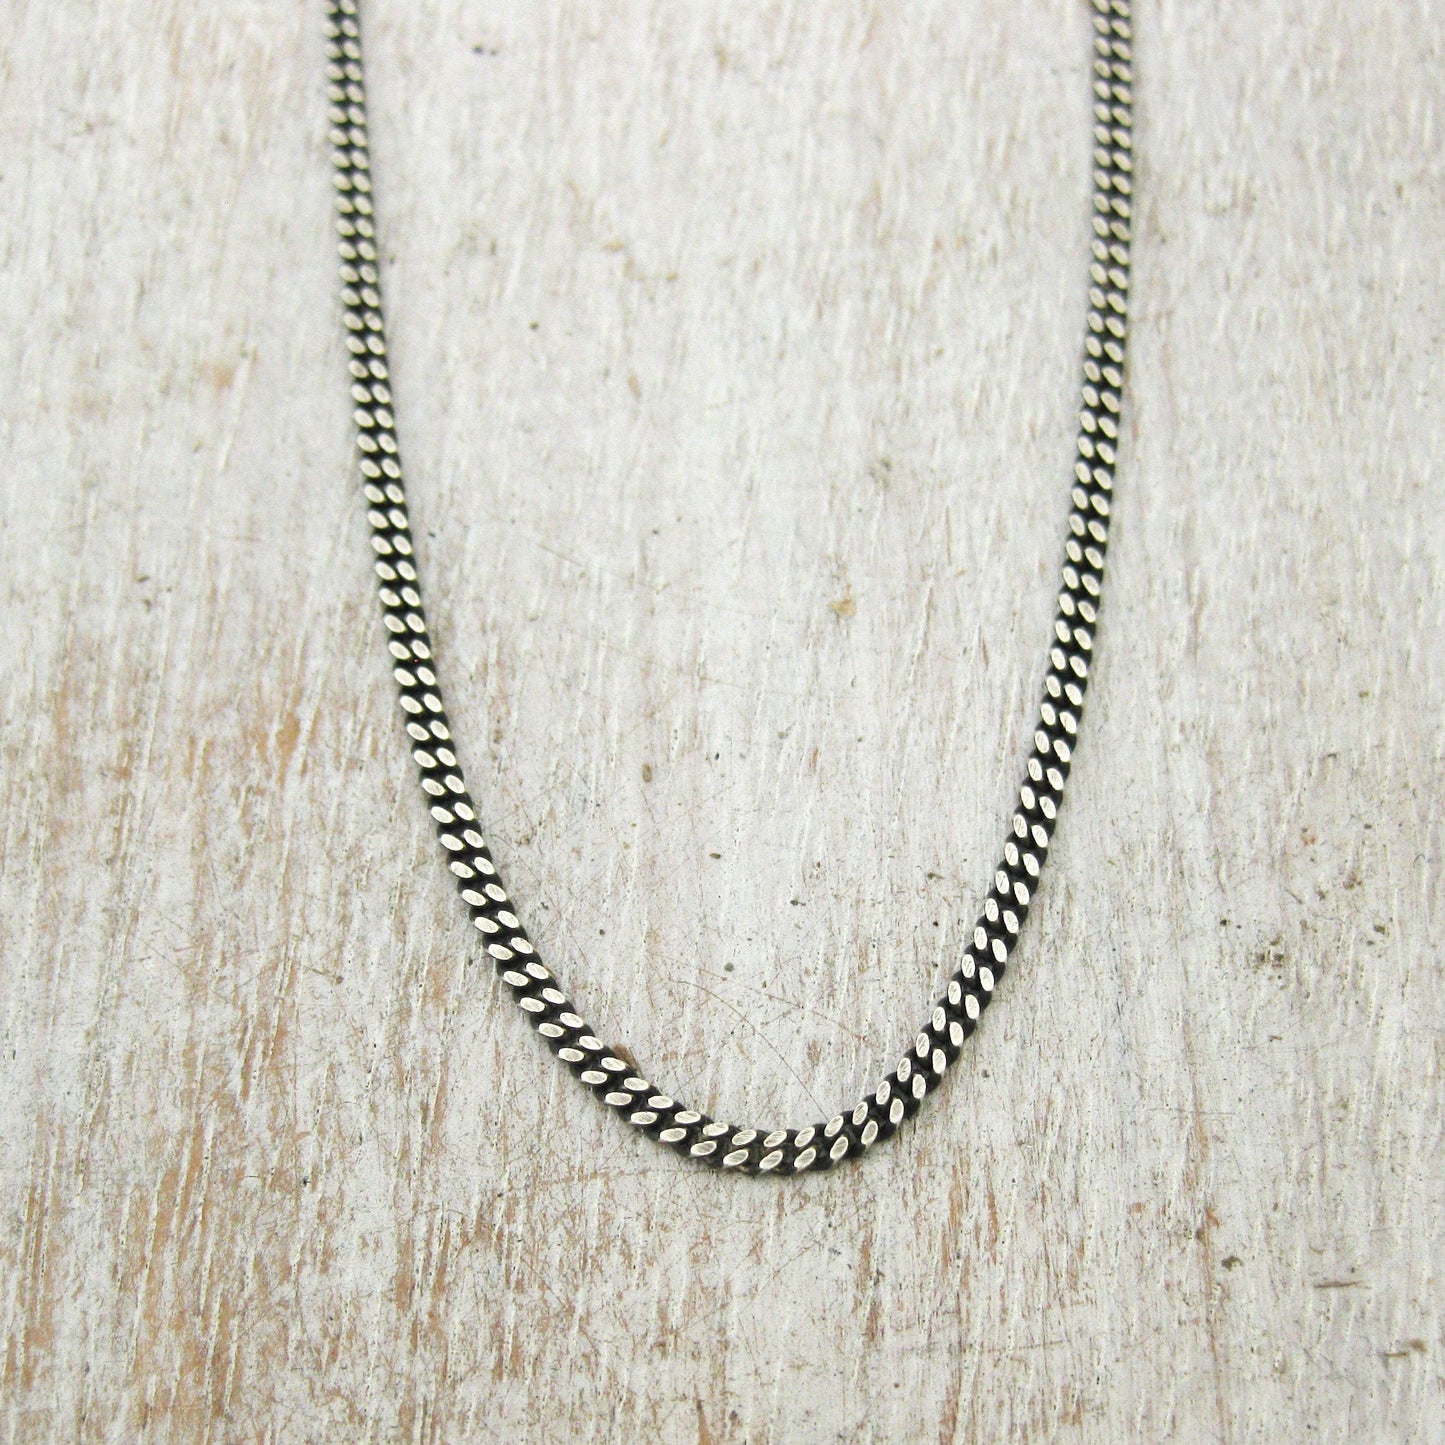 Sterling Silver Oxidized or Shiny Curb Chain, 18" to 30" Lengths, 2mm or 3mm, Man's Silver Chain, Blackened Necklace for Men, Unisex Chain